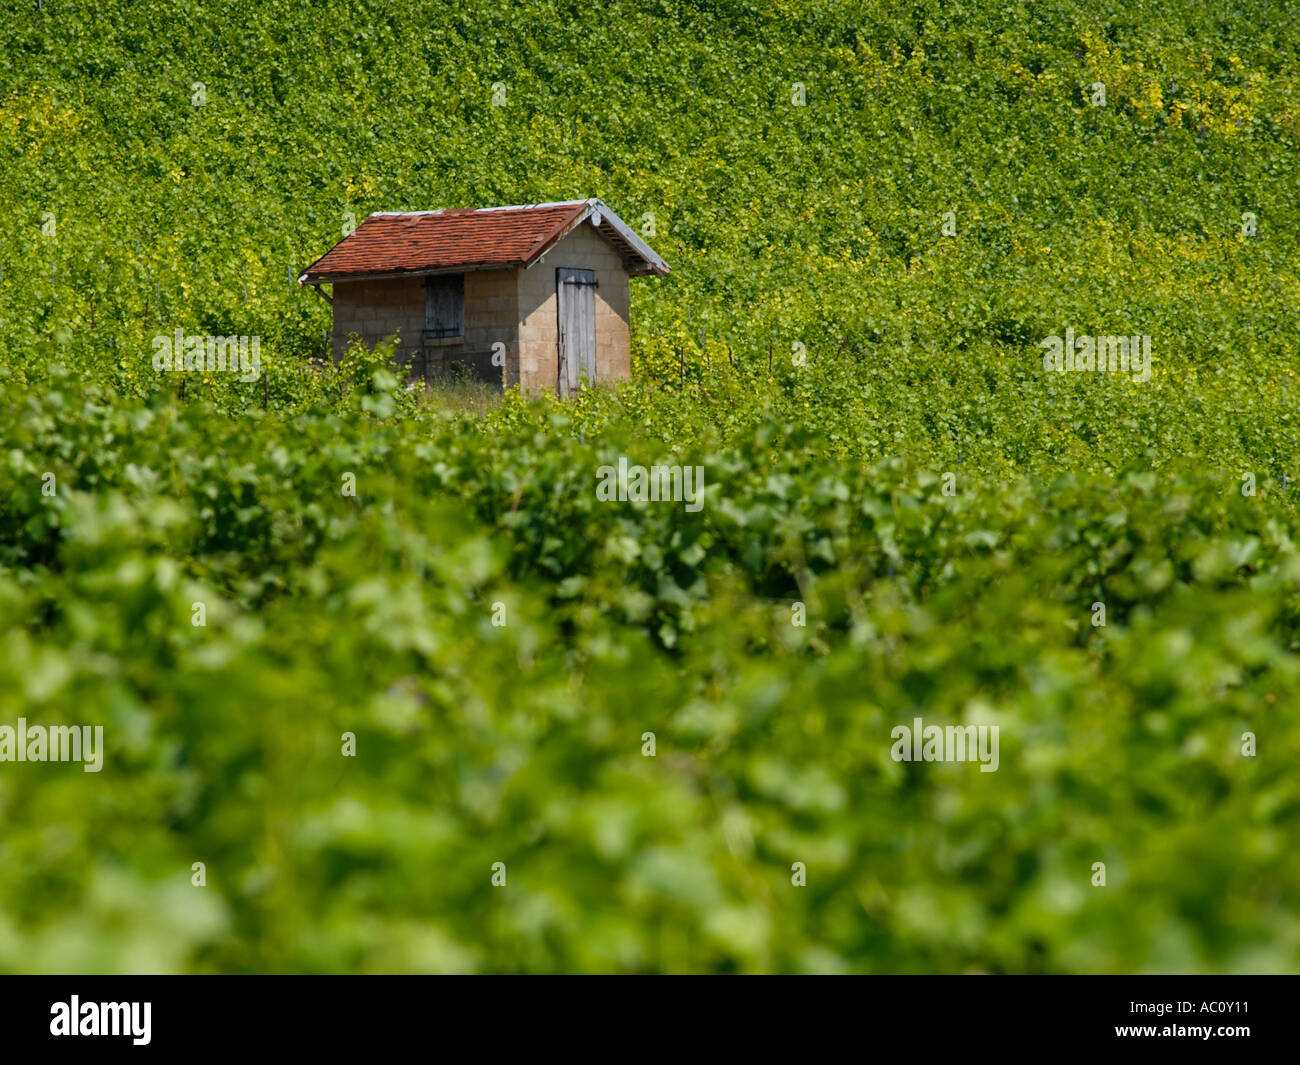 Little old shed in the middle of grapevines growing on the hillside in the Champagne vineyards near Bar sur Aube France Stock Photo